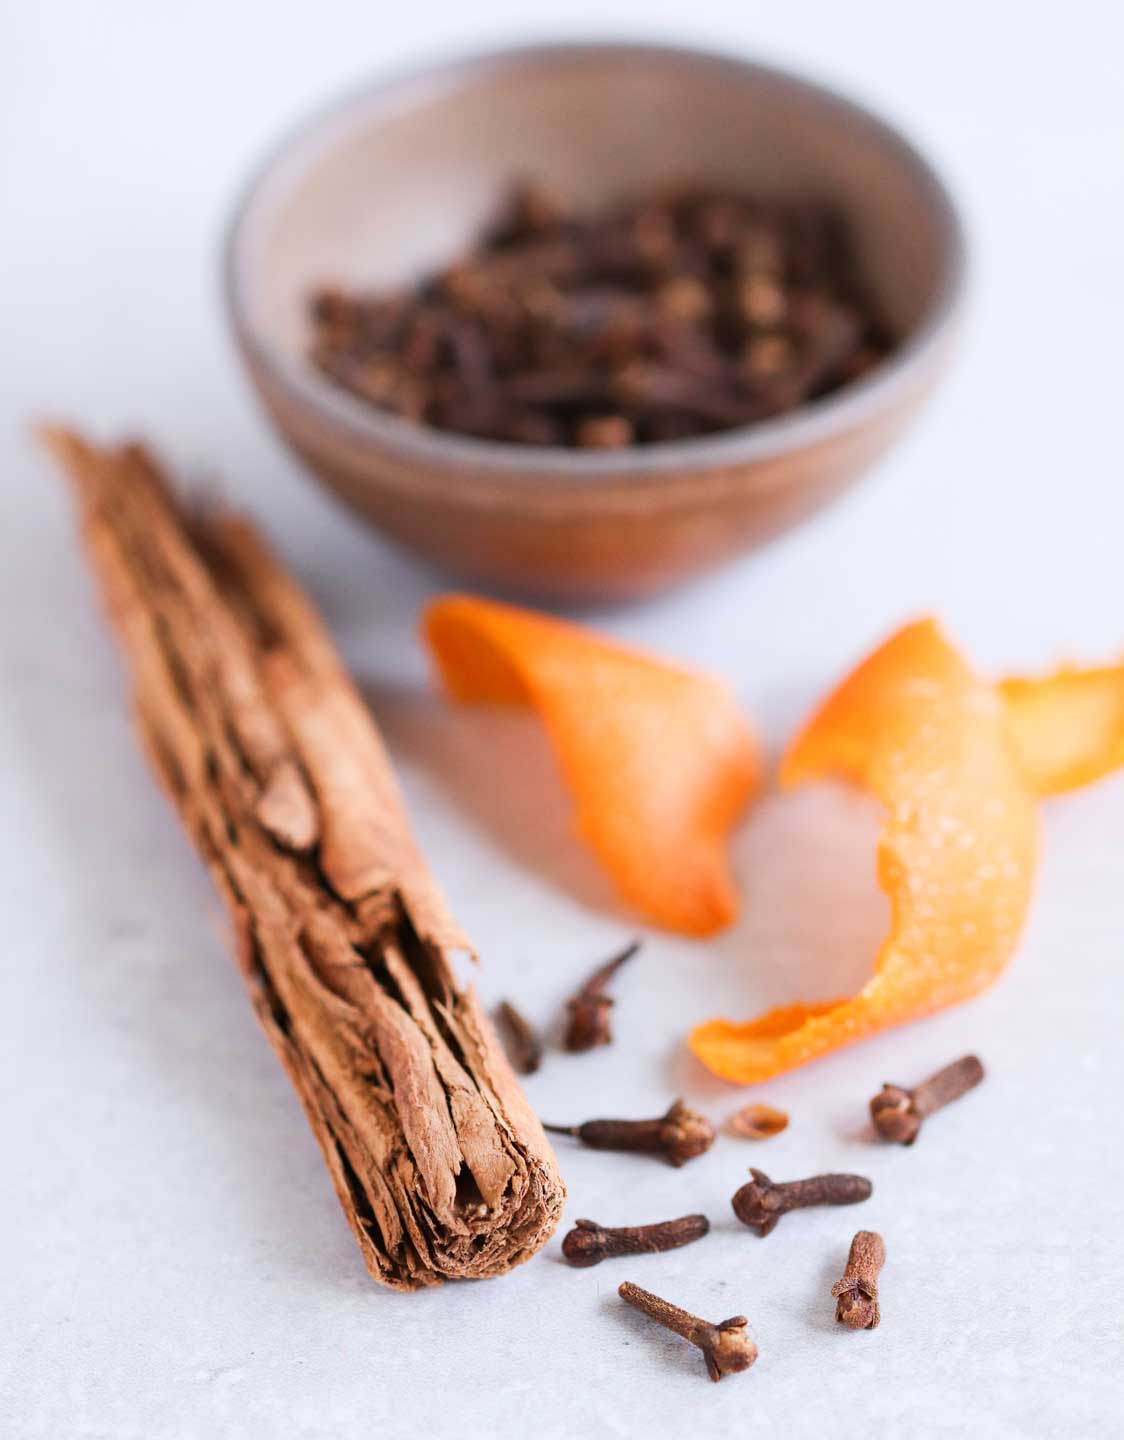 Cinnamon bark, whole cloves and orange peel in the foreground with a bowl of cloves blurred out.